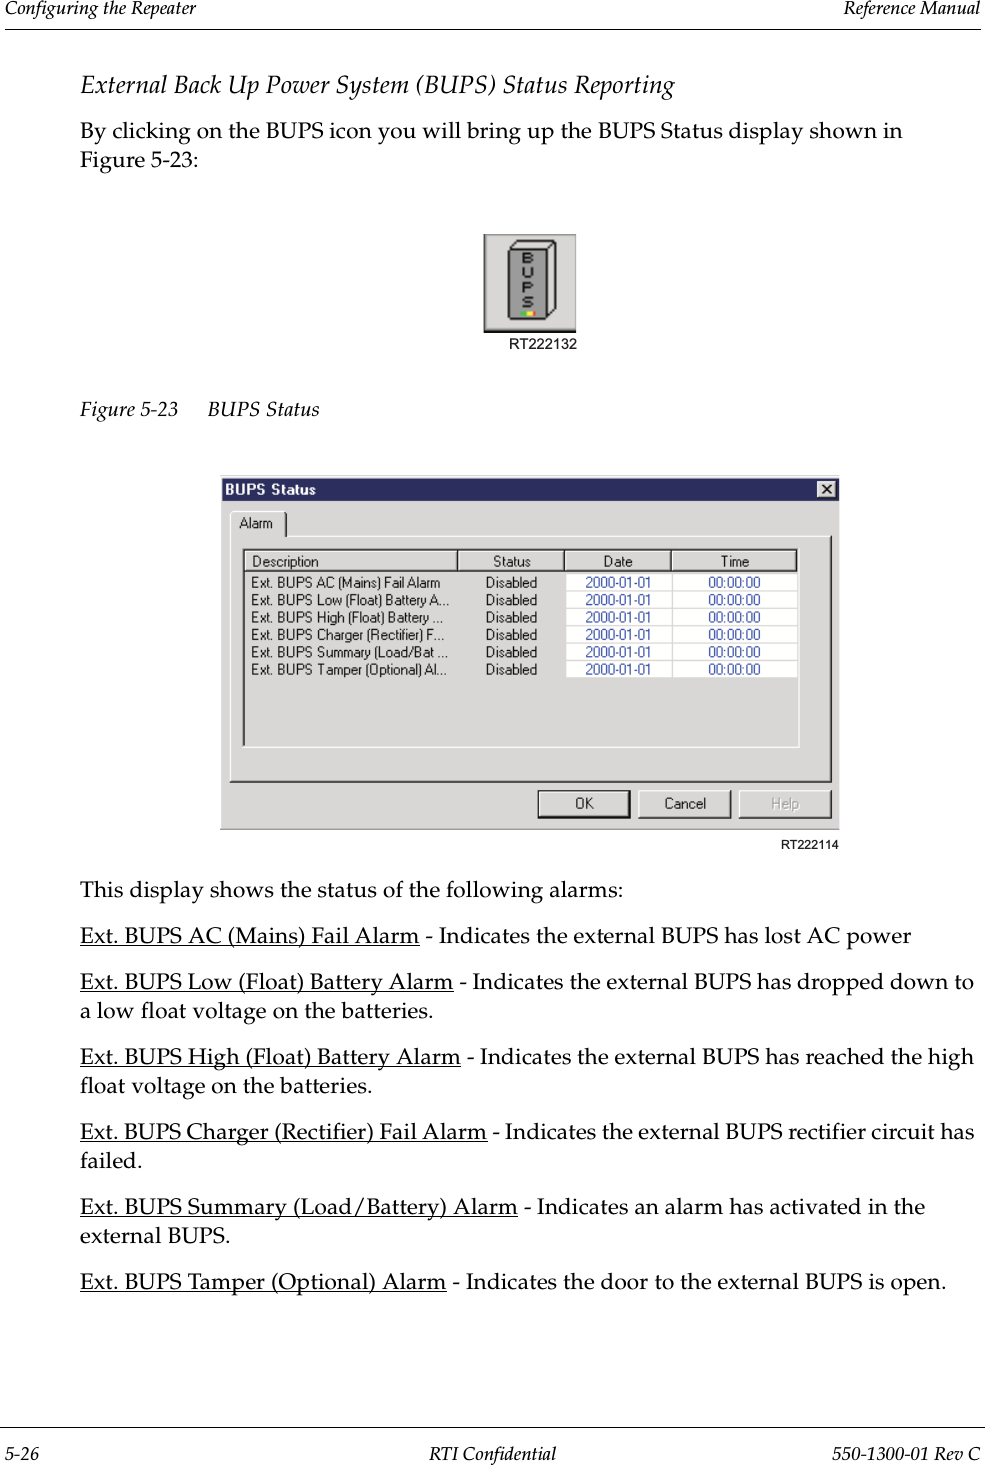 Configuring the Repeater                 Reference Manual5-26 RTI Confidential 550-1300-01 Rev CExternal Back Up Power System (BUPS) Status ReportingBy clicking on the BUPS icon you will bring up the BUPS Status display shown in Figure 5-23:Figure 5-23 BUPS StatusThis display shows the status of the following alarms:Ext. BUPS AC (Mains) Fail Alarm - Indicates the external BUPS has lost AC powerExt. BUPS Low (Float) Battery Alarm - Indicates the external BUPS has dropped down to a low float voltage on the batteries.Ext. BUPS High (Float) Battery Alarm - Indicates the external BUPS has reached the high float voltage on the batteries.Ext. BUPS Charger (Rectifier) Fail Alarm - Indicates the external BUPS rectifier circuit has failed.Ext. BUPS Summary (Load/Battery) Alarm - Indicates an alarm has activated in the external BUPS.Ext. BUPS Tamper (Optional) Alarm - Indicates the door to the external BUPS is open.RT222132RT222114